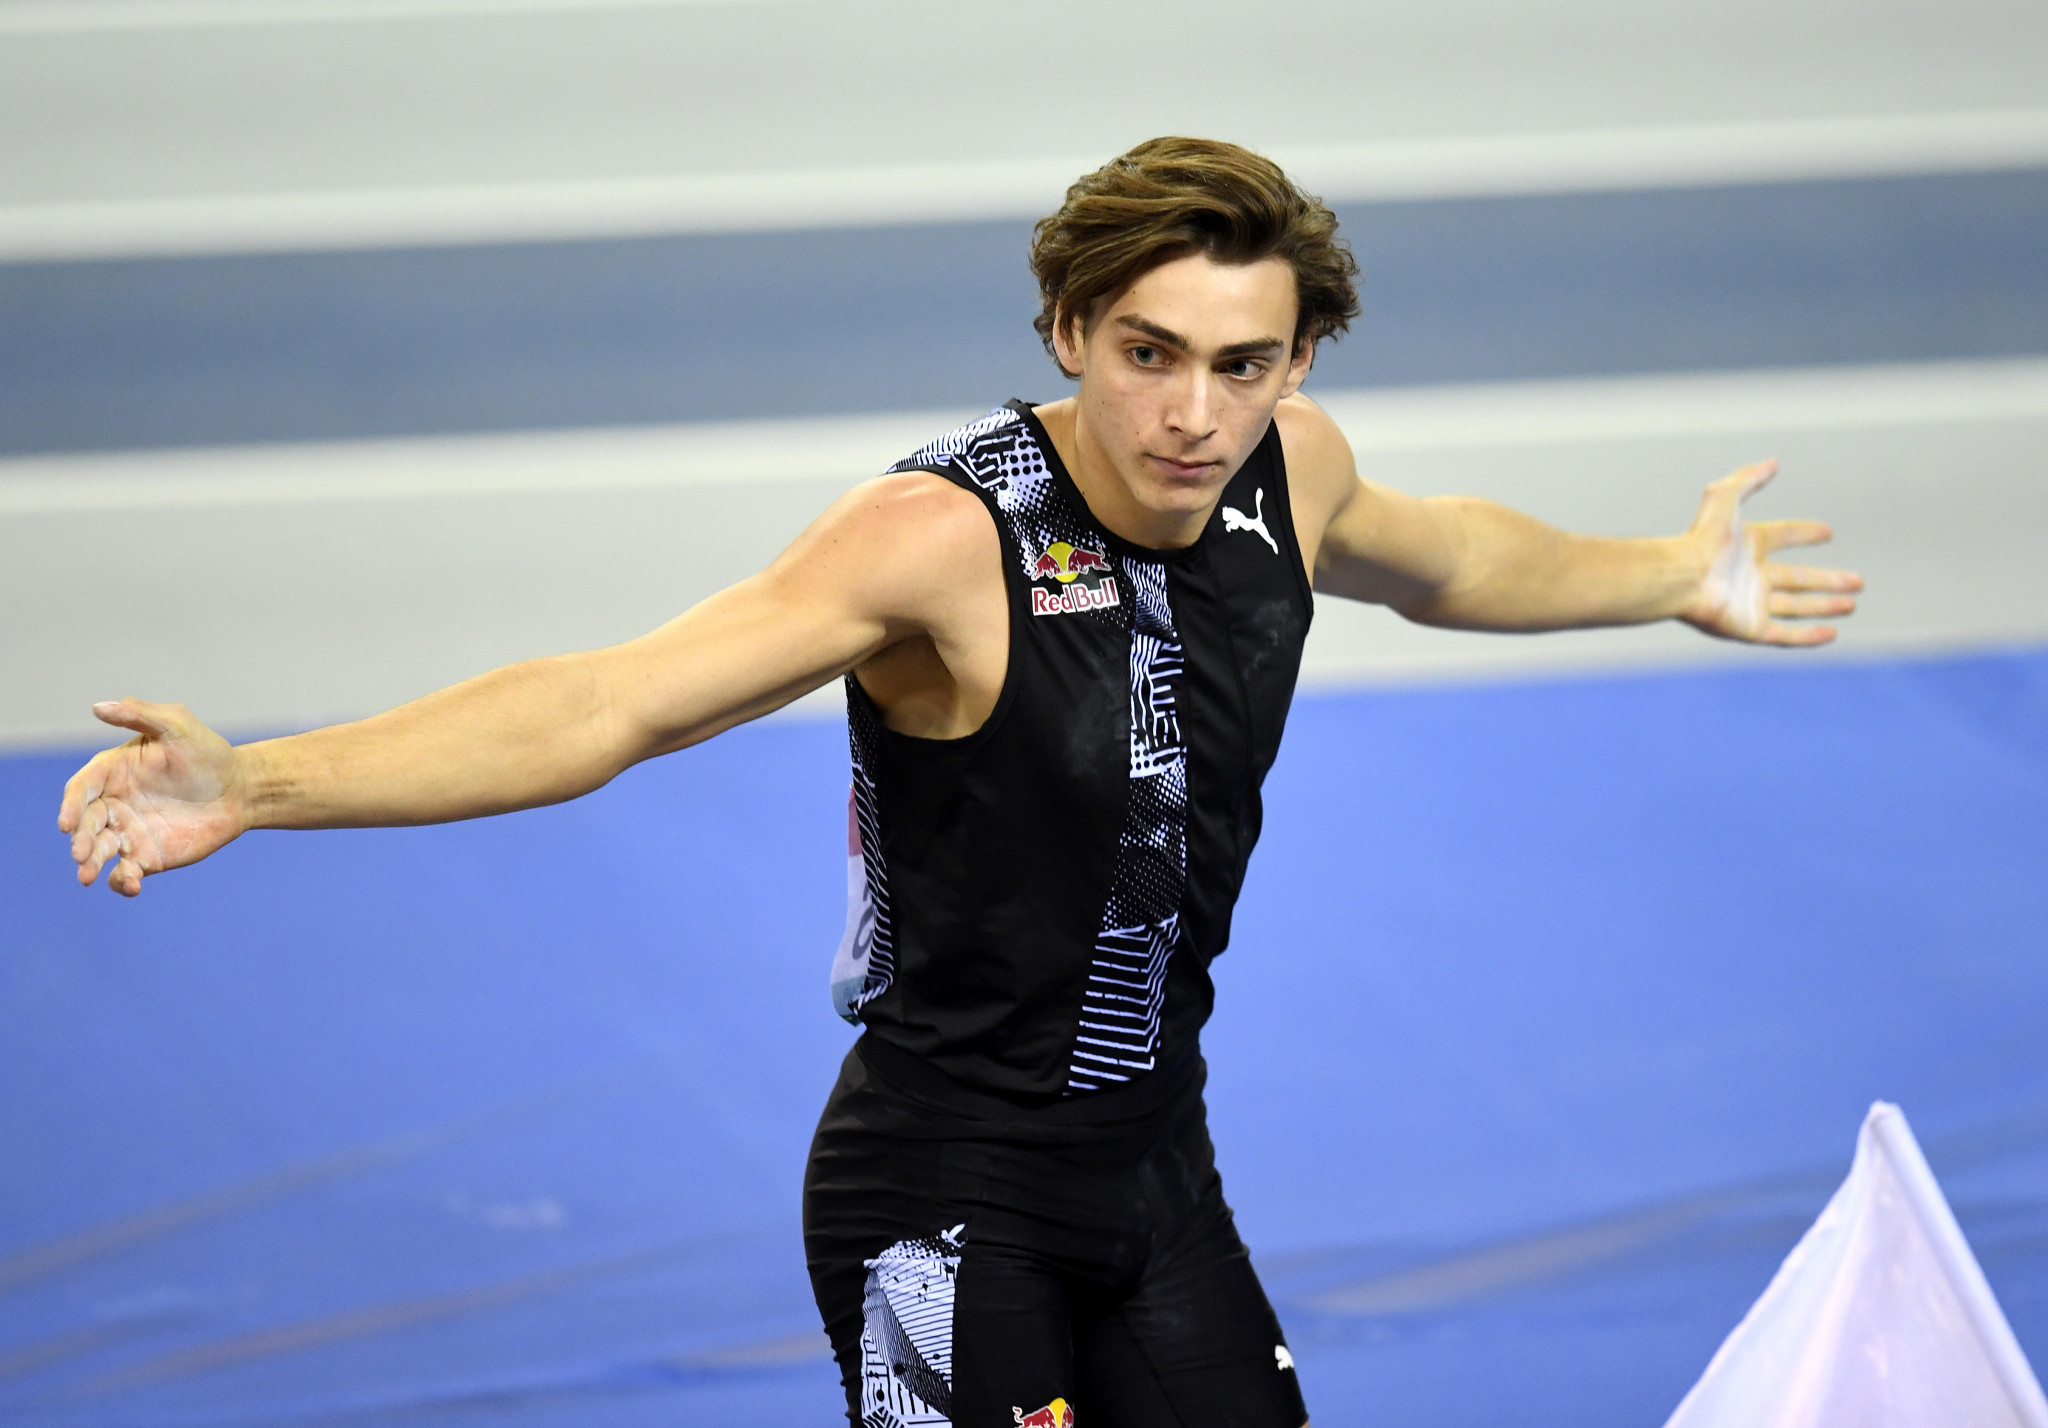 Armand Duplantis, pictured after raising his pole vault world record to 6.18 in Glasgow on Sunday, will seek a third consecutive world-best mark when he competes in Liévin tomorrow in the World Athletics Indoor Tour ©Getty Images